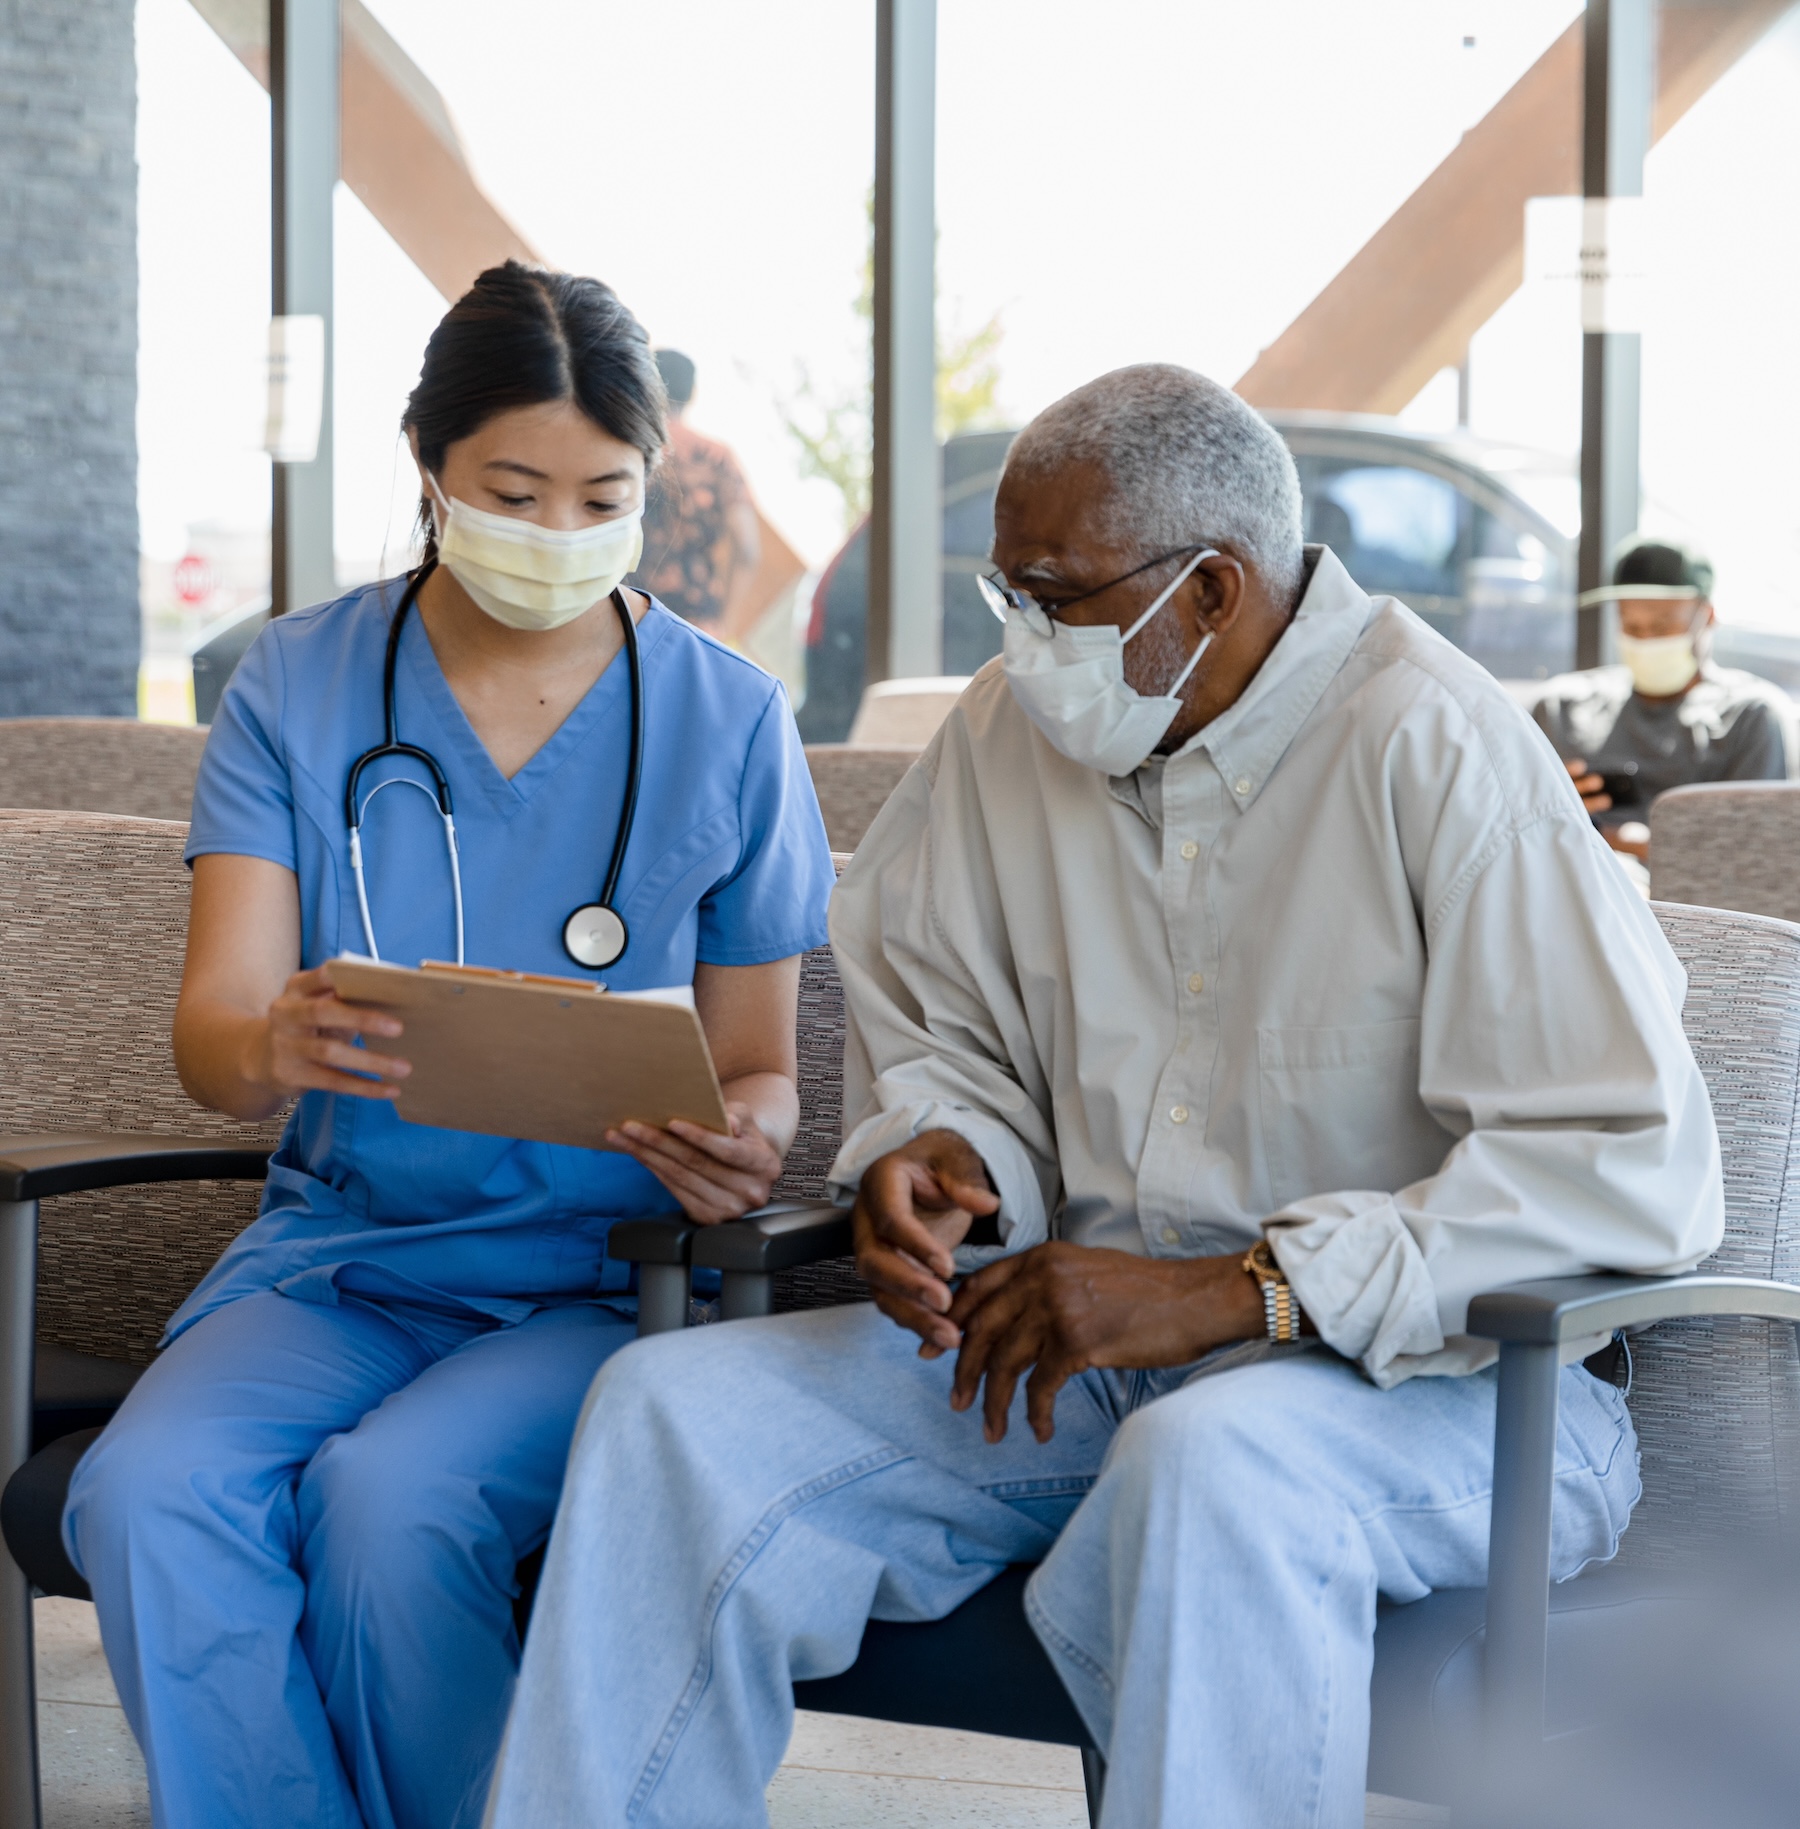 A nurse helps an elderly Black man wearing a mask fill out his paperwork in the lobby of a hospital.